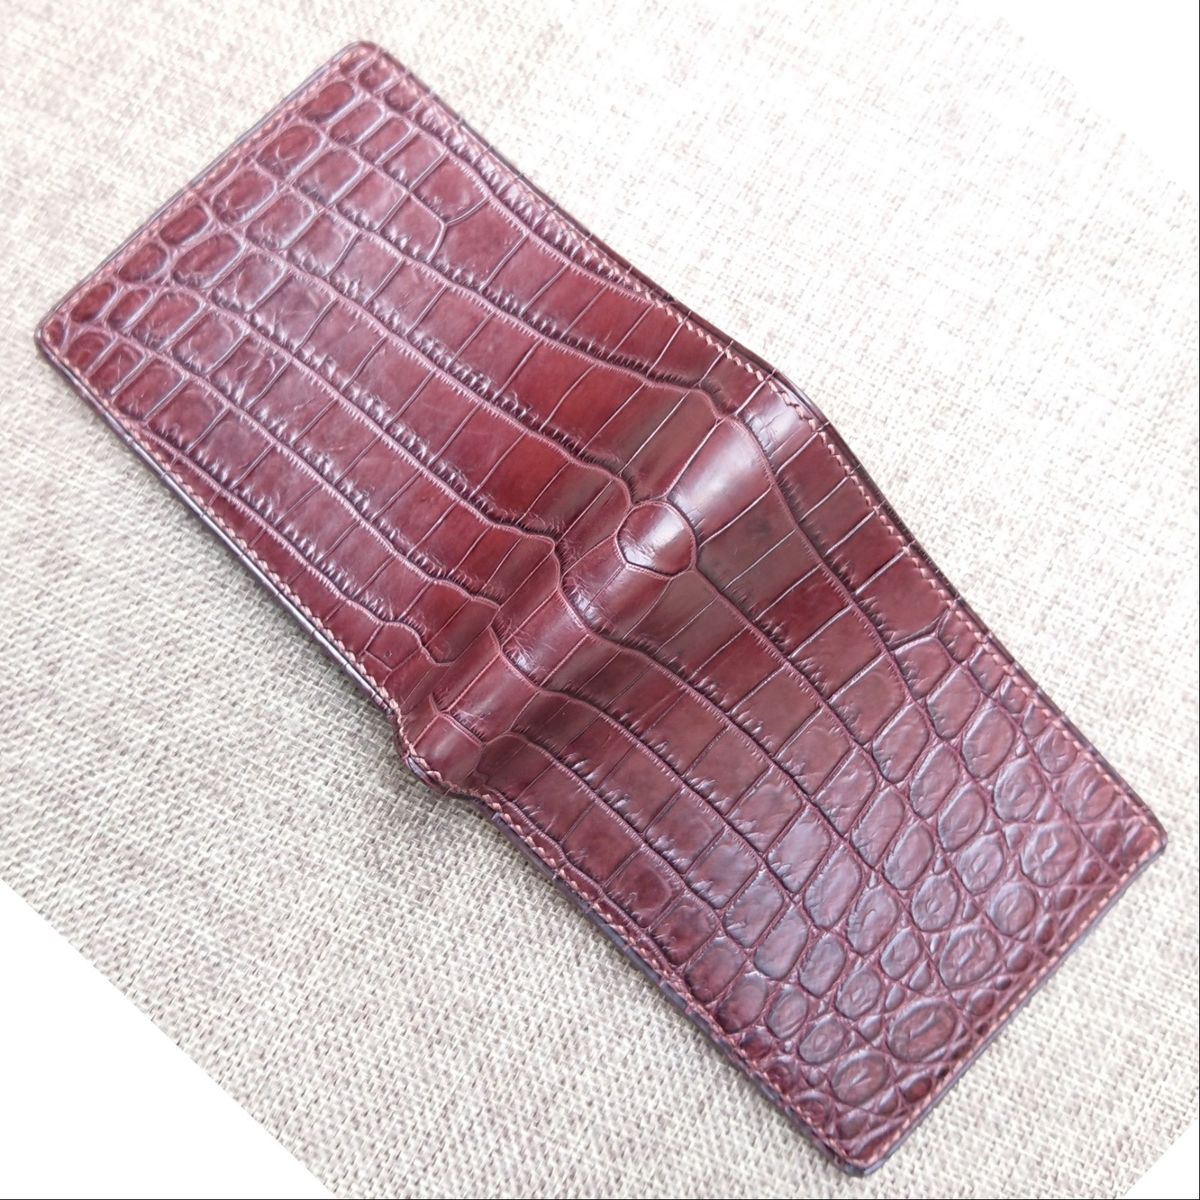 Is Alligator Skin Wallet expensive? Where to buy it?